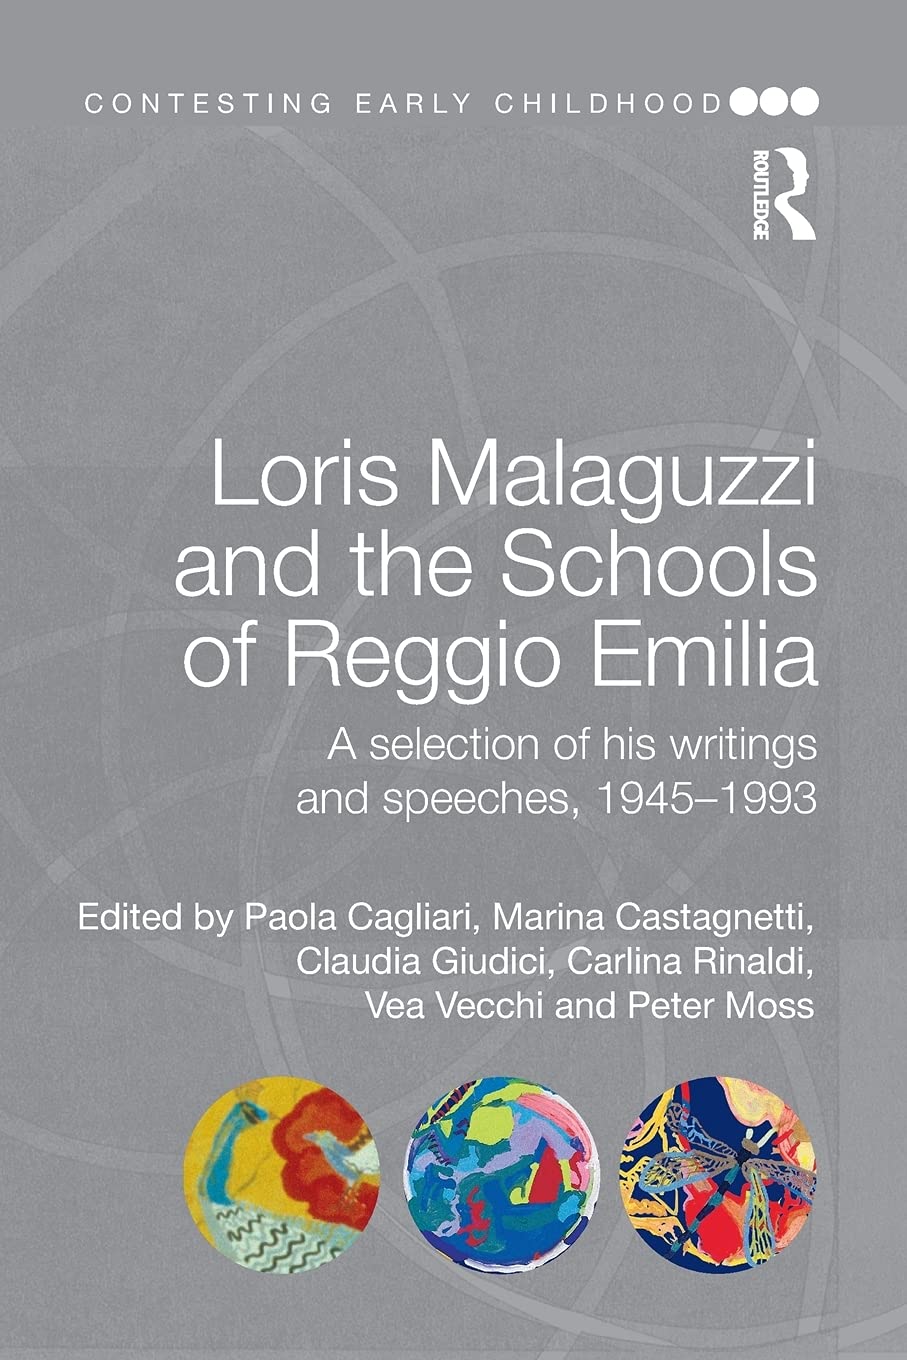 Loris Malaguzzi and the Schools of Reggio Emilia: A selection of his writings and speeches, 1945-1993 (Contesting Early Childhood)